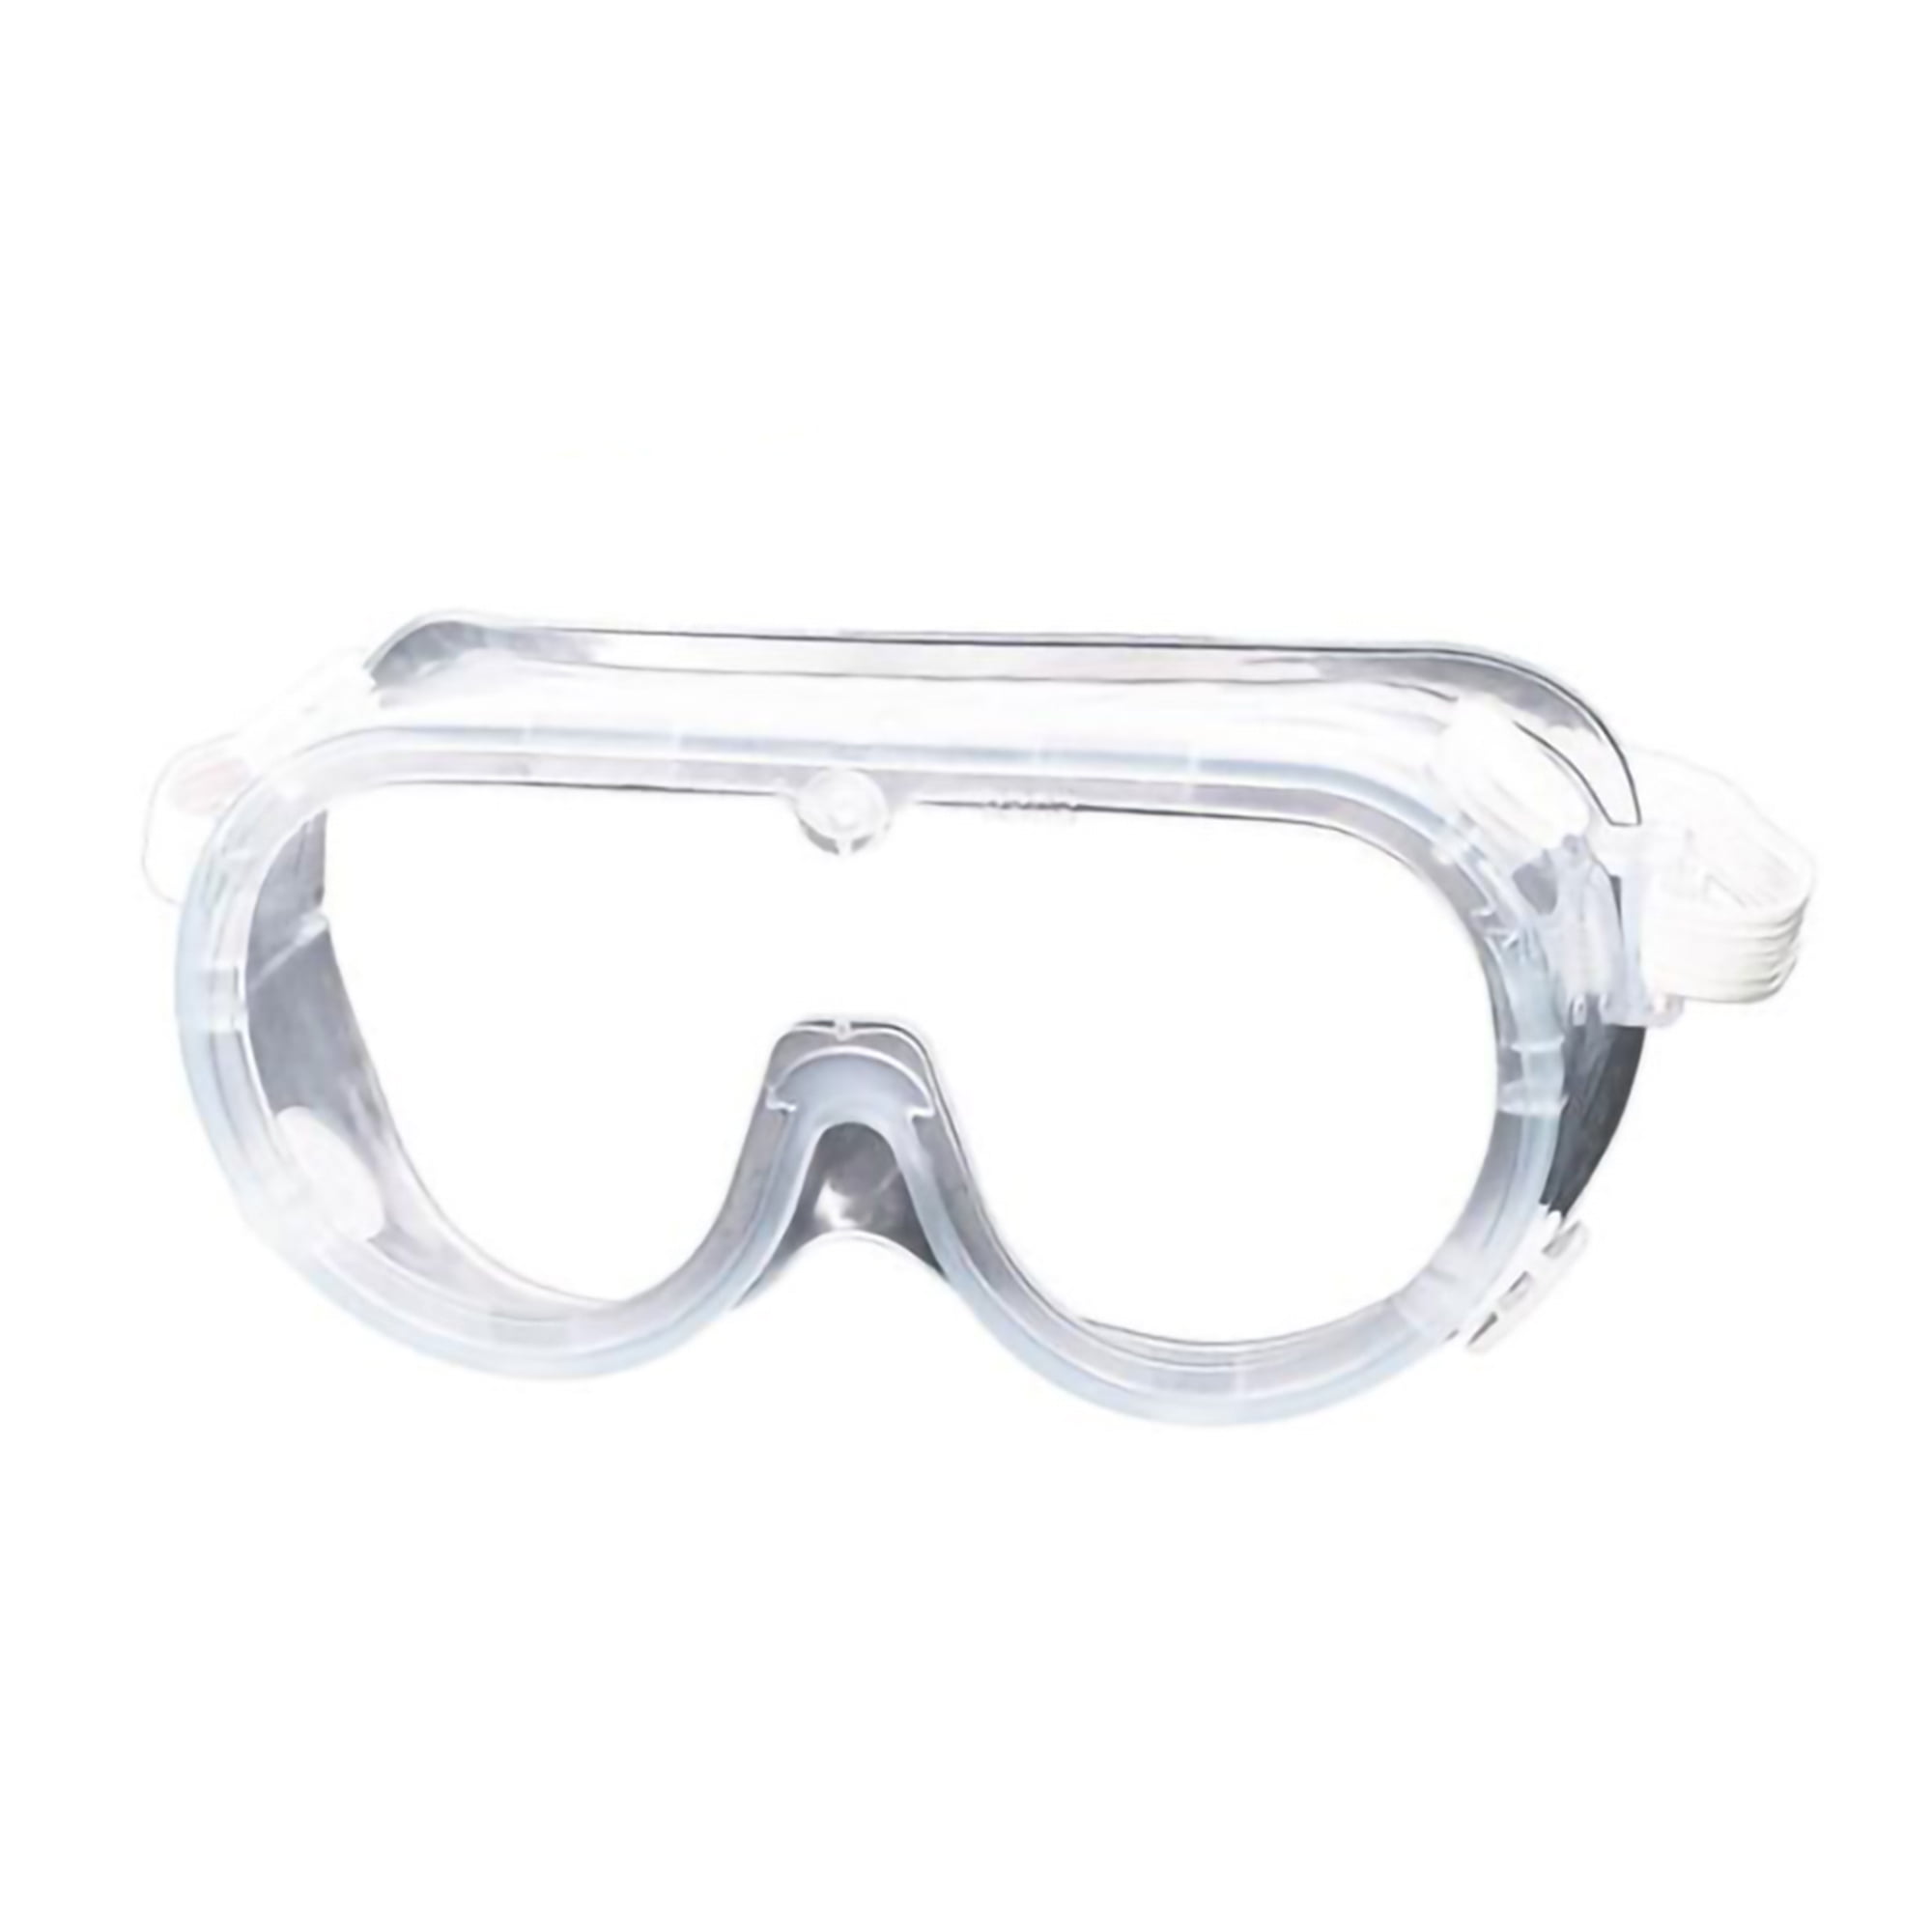 Clear Protective Safety Glasses Eye Protection Anti-fog Fit-over goggles 